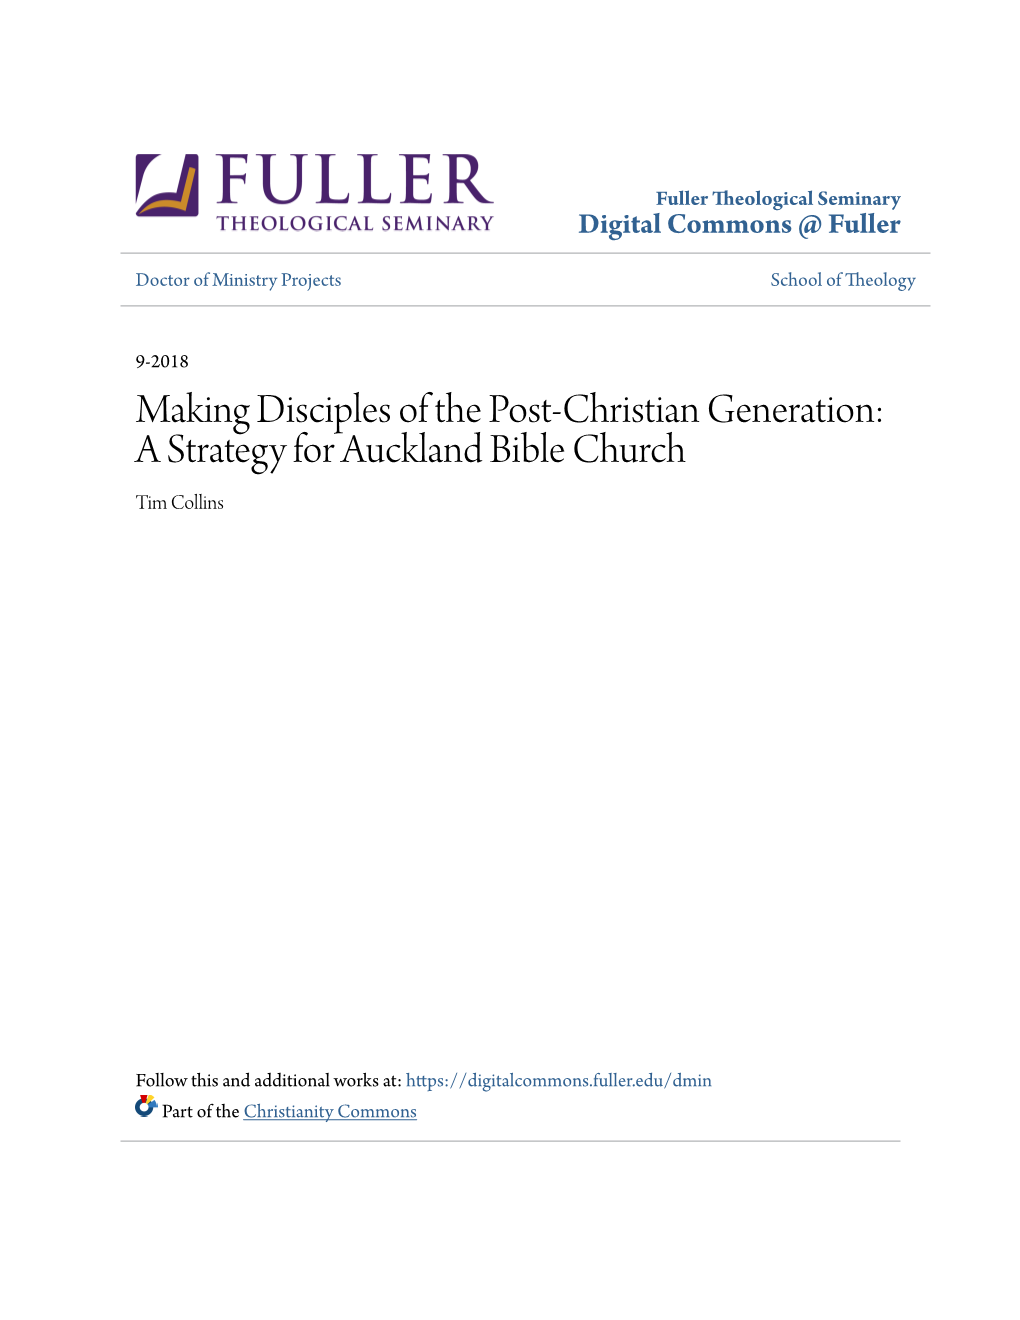 Making Disciples of the Post-Christian Generation: a Strategy for Auckland Bible Church Tim Collins